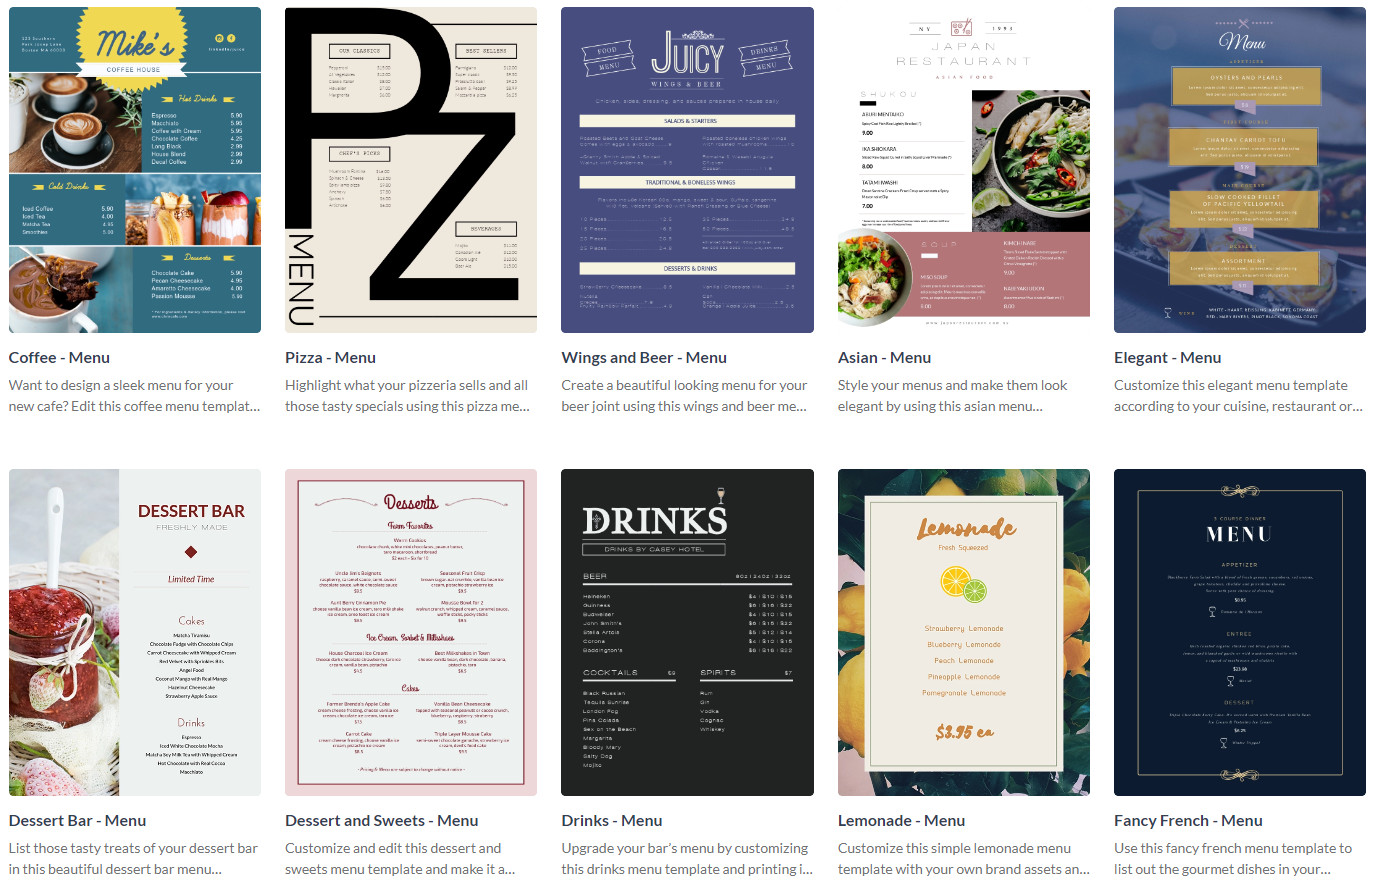 Another example of one of the best software for menu design for restaurants and cafes